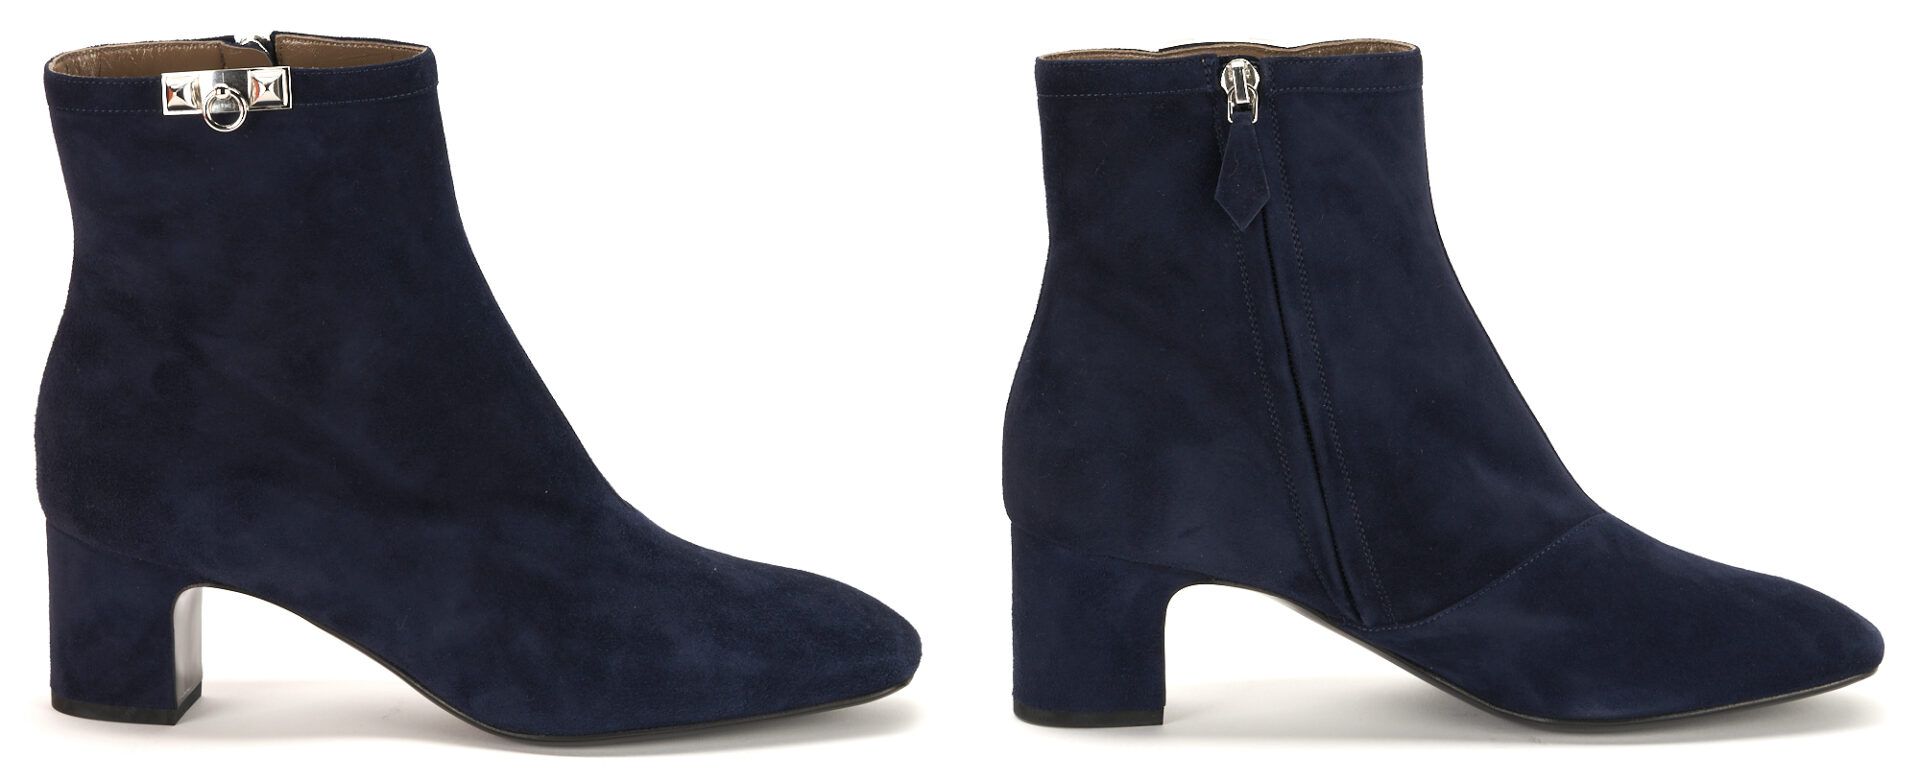 Lot 1169: 3 Pairs of Hermes Ankle Boots, incl. Leather Sock, Blue Suede Saint Germain, Brown Suede